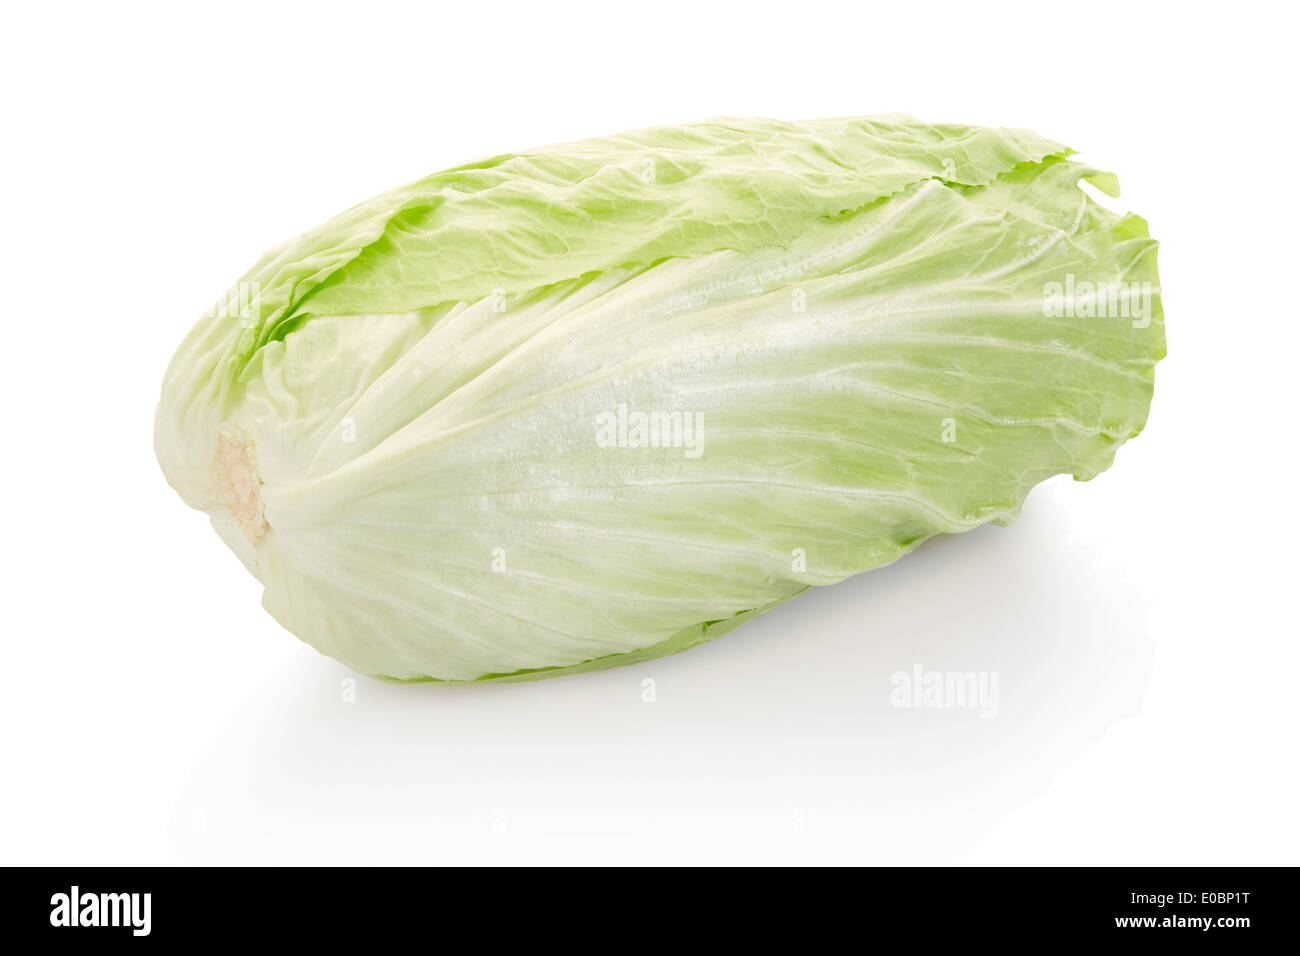 Green chinese long cabbage Stock Photo